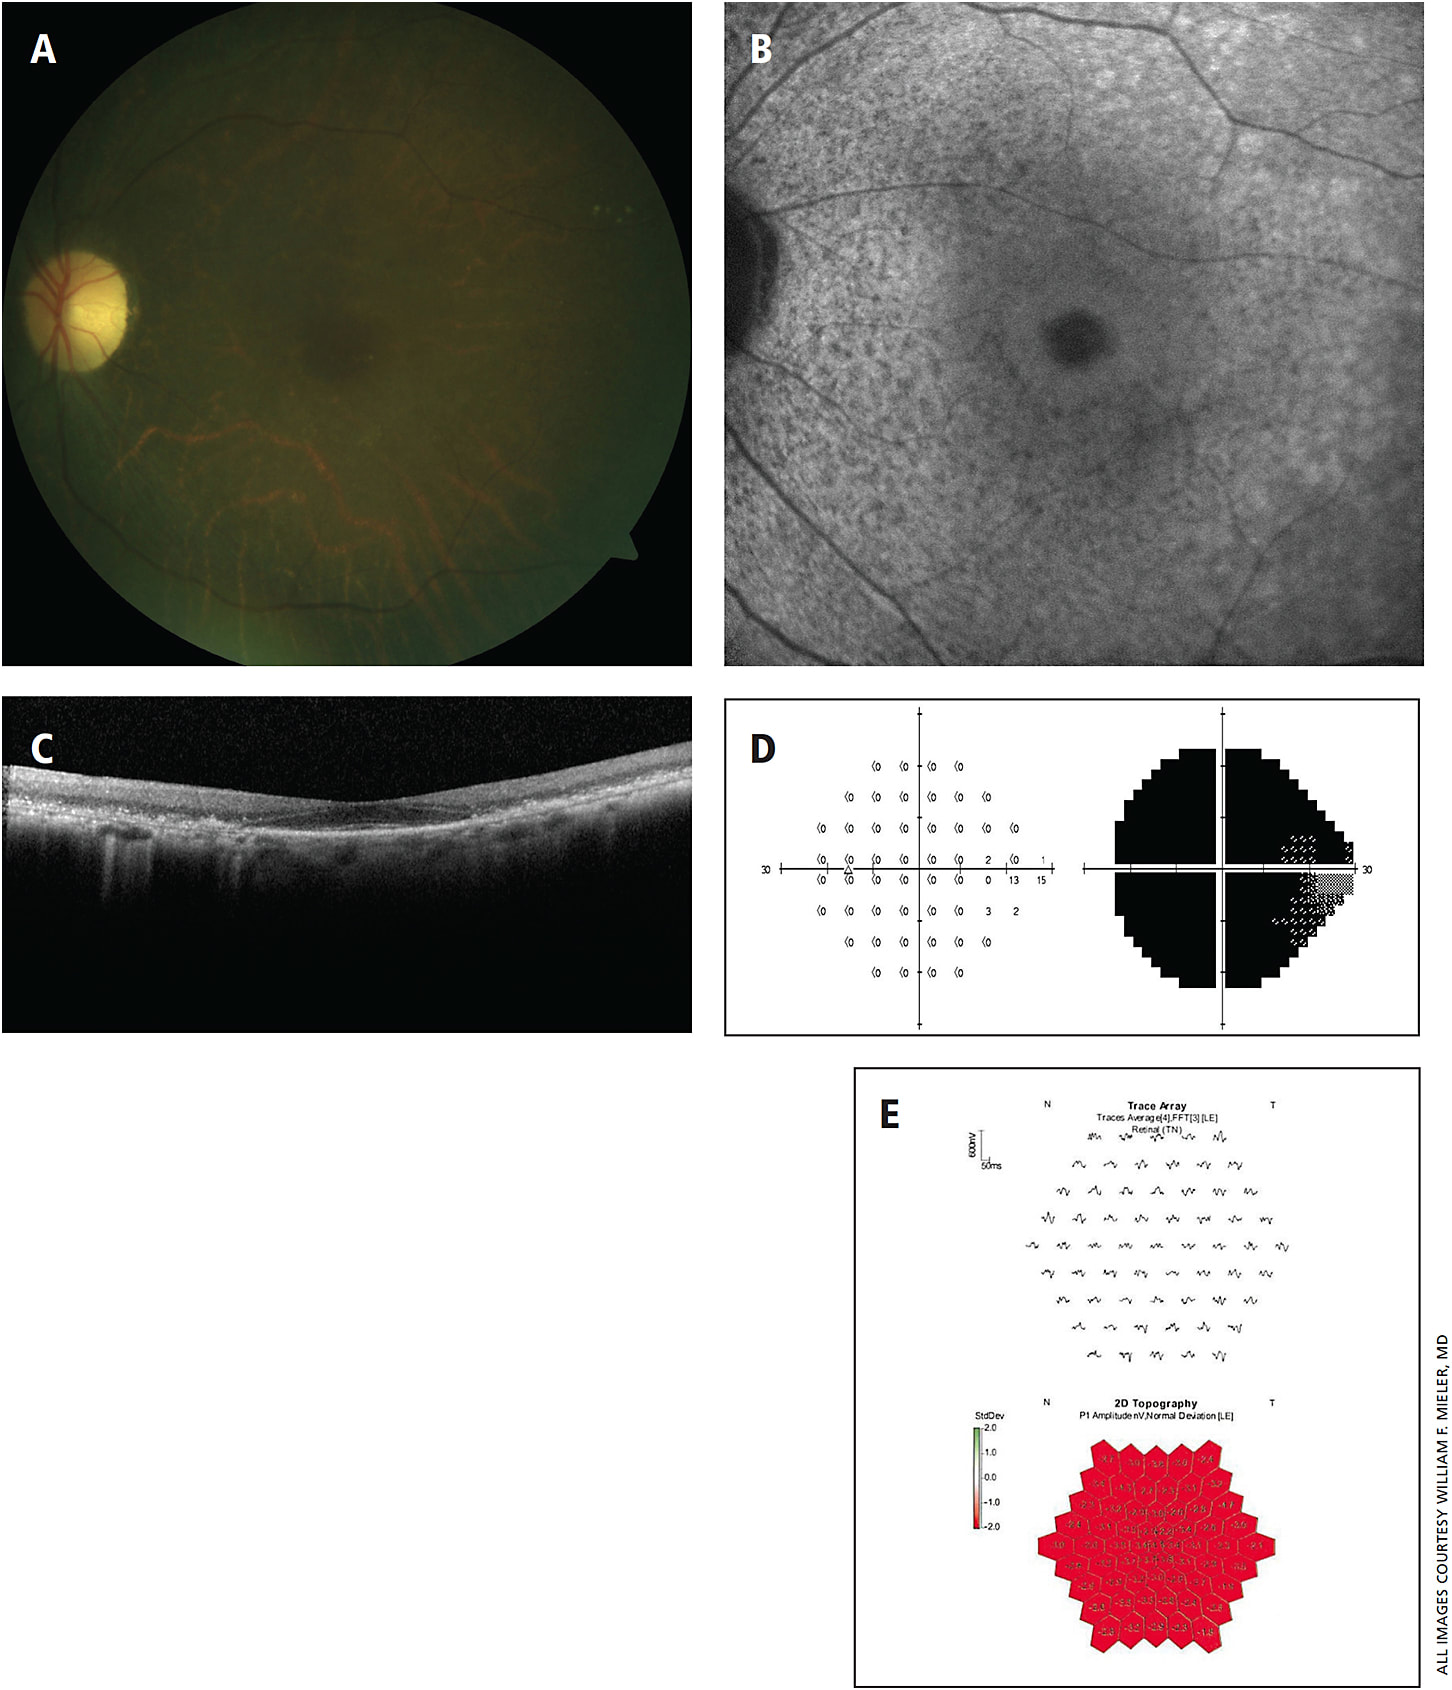 Figure 2. Severe hydroxychloroquine toxicity. A 66-year-old female referred for macular drusen. The patient had a long history of systemic lupus erythematosus and rheumatoid arthritis, which was managed with 31 years of hydroxychloroquine therapy at doses as high as 8.0 mg/kg/day despite worsening renal function. Her visual acuity was 20/30 at this time, but she complained of worsening peripheral vision. (A) Diffuse macular RPE atrophy. (B) Bull’s eye pattern of autofluorescence with mottled changes throughout the macula. (C) Diffuse outer retinal and RPE attenuation sparing the fovea. (D) Global depression on Humphrey visual field testing. (E) Multifocal ERG confirms the diagnosis of hydroxychloroquine toxicity with diffuse severe cone dysfunction.